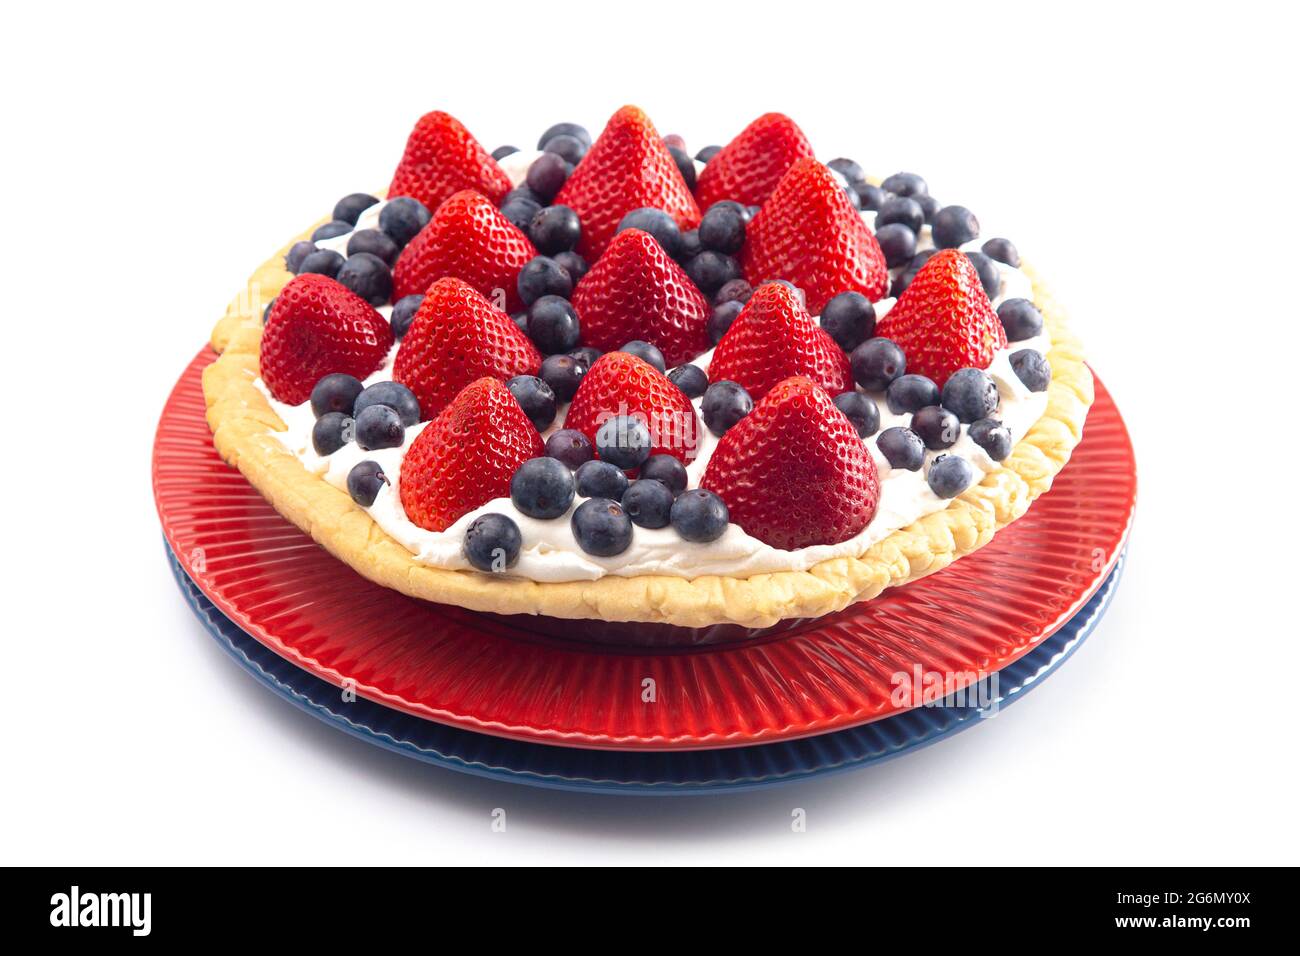 Strawberry and Blueberry Fresh Summer Pie Isolated on a White Background Stock Photo